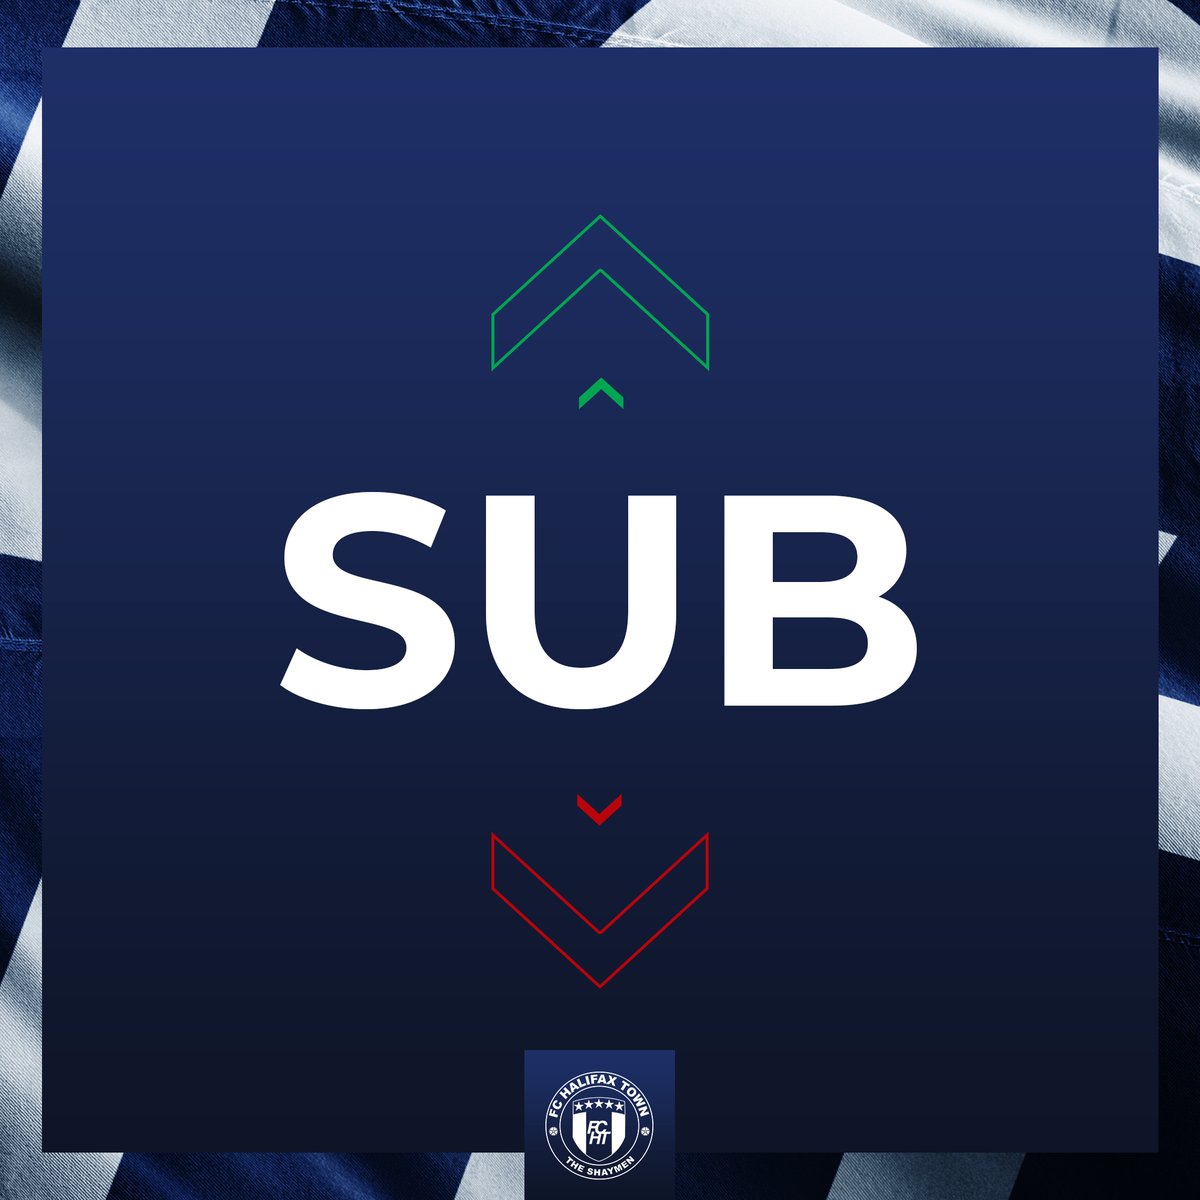 ⏰ 61' | Substitution Hoti comes on for Wright. 🟡 3-1 ⚪ #Shaymen | EI